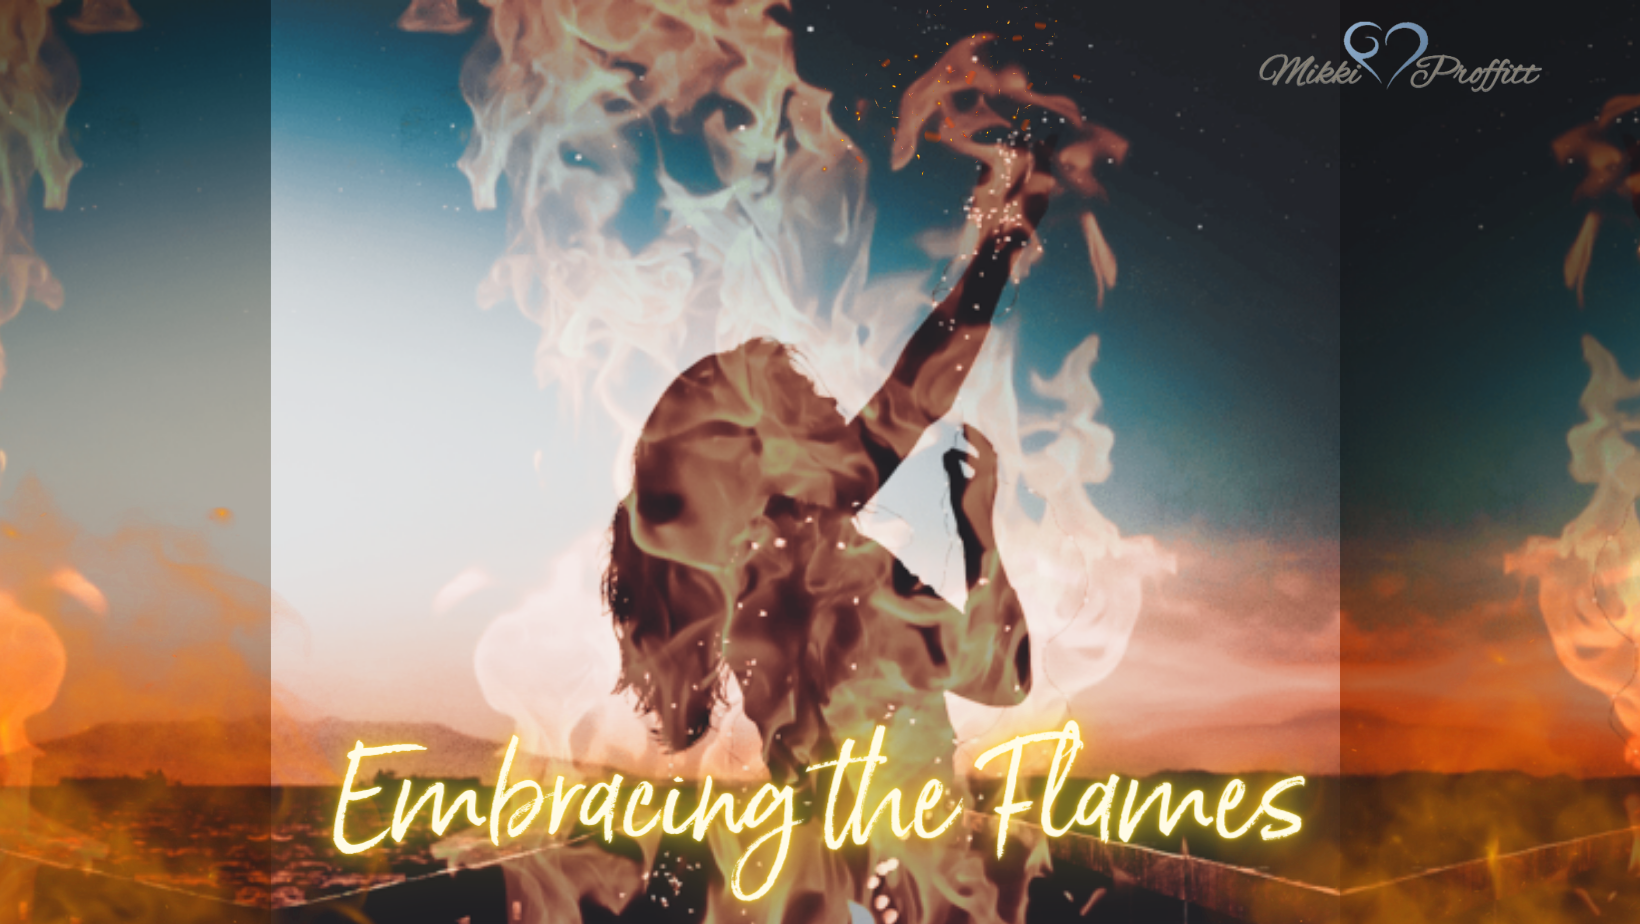 woman dancing in the flames